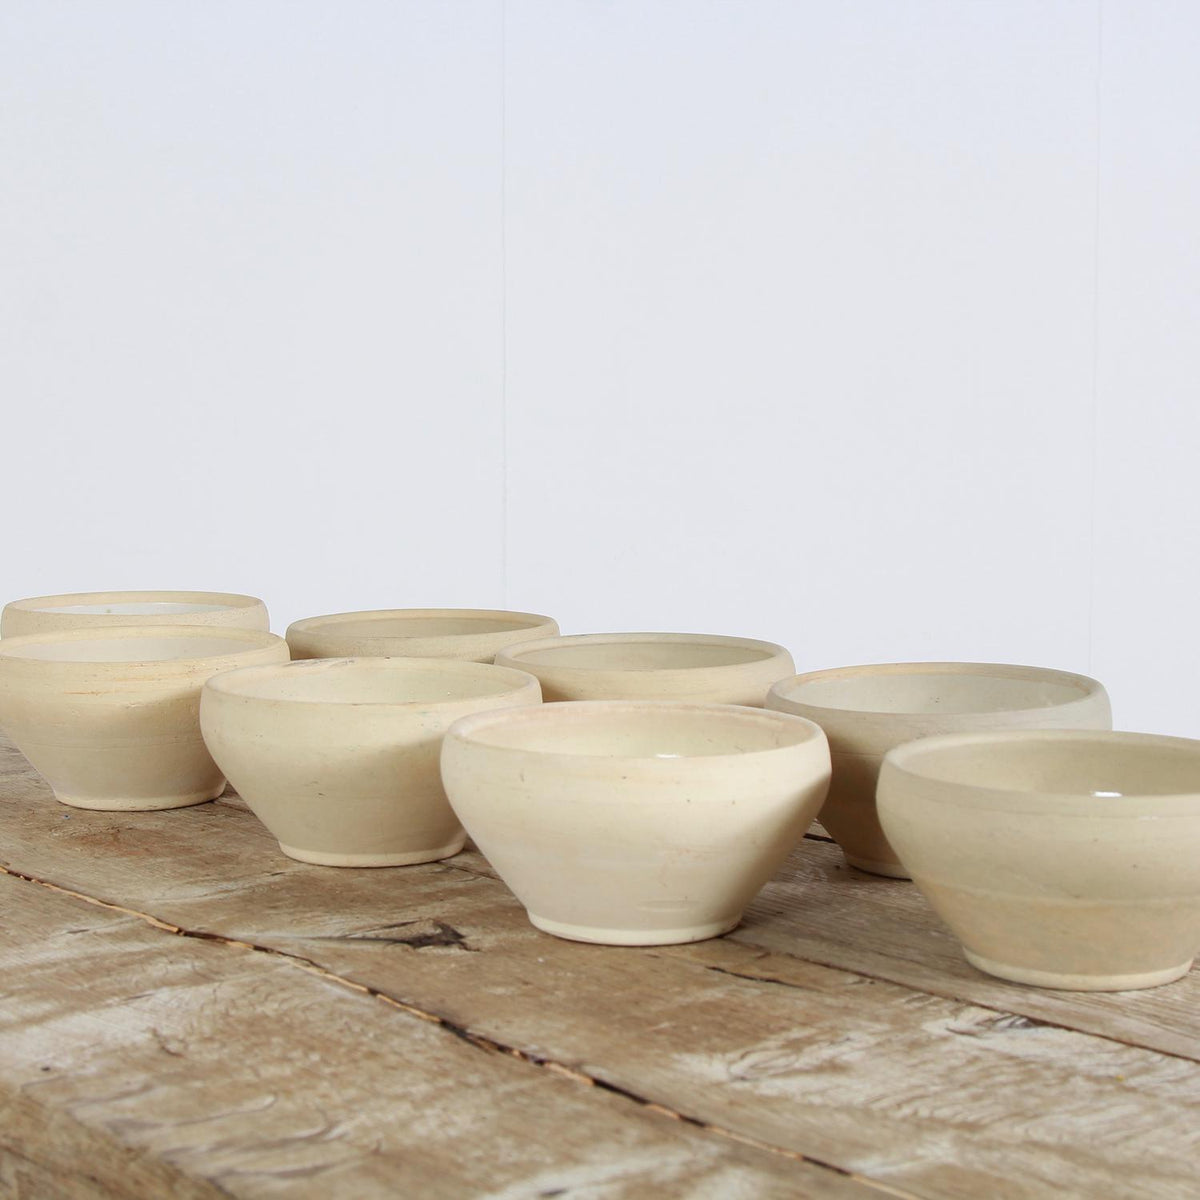 Collection of French Creamware Bowls with Minimalistic Design